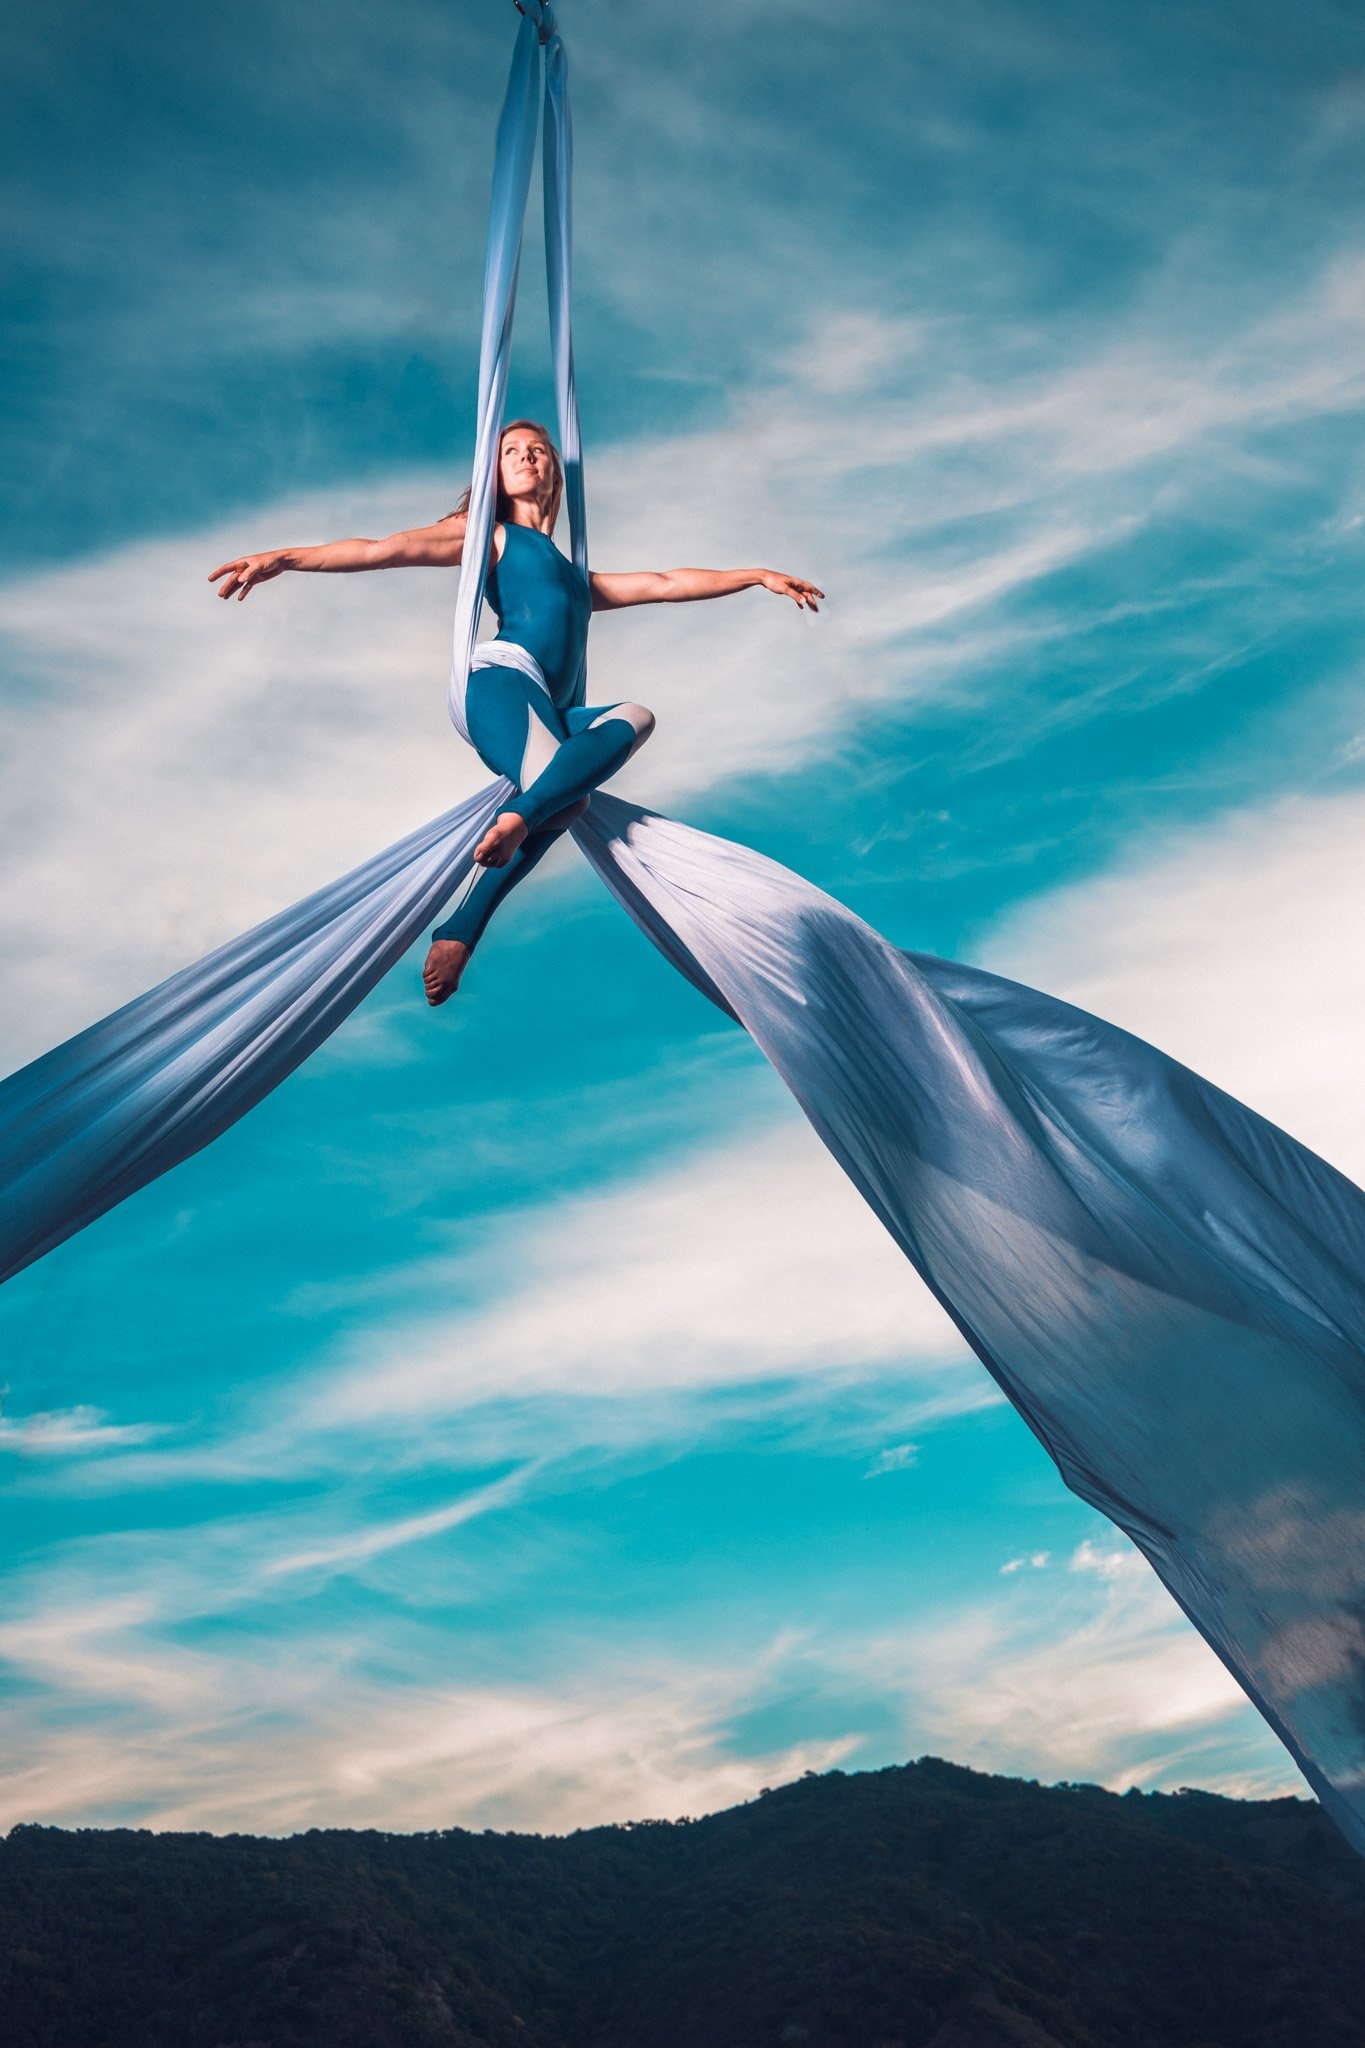 Aerial Silks: Extreme performance in the air by a professional aerialist, Outdoor sports activity. 1370x2050 HD Wallpaper.